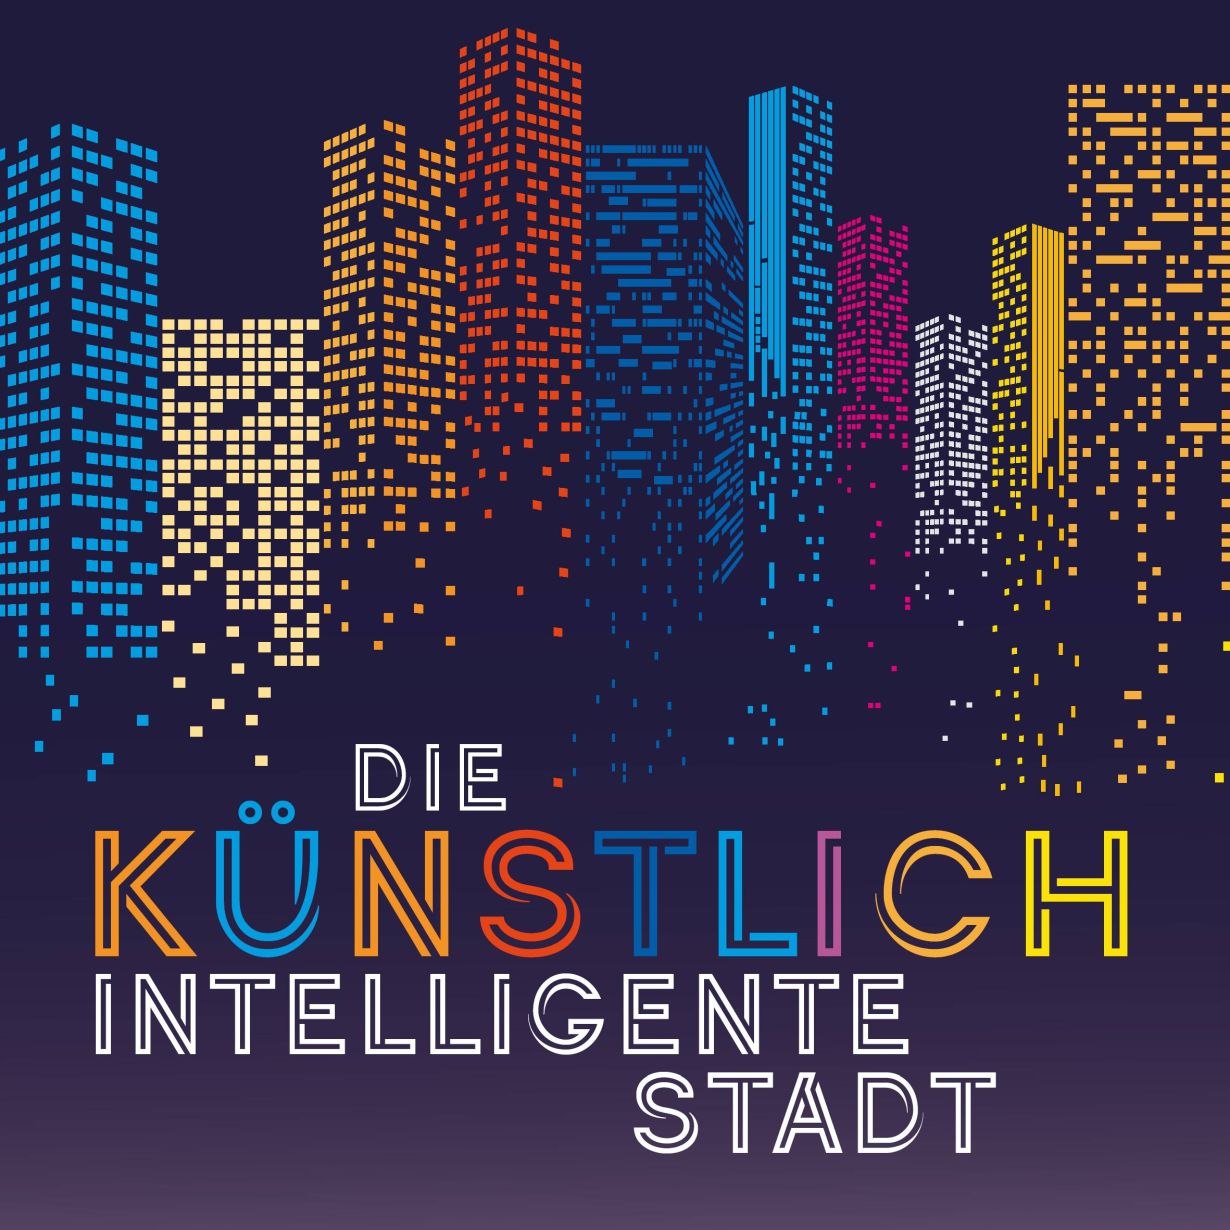 Home, transport, shopping: The 2018 Karlsruhe Dialogues focus on what makes our cities smart and how citizens deal with it. (Graphics: Sahar Aharoni, KIT)